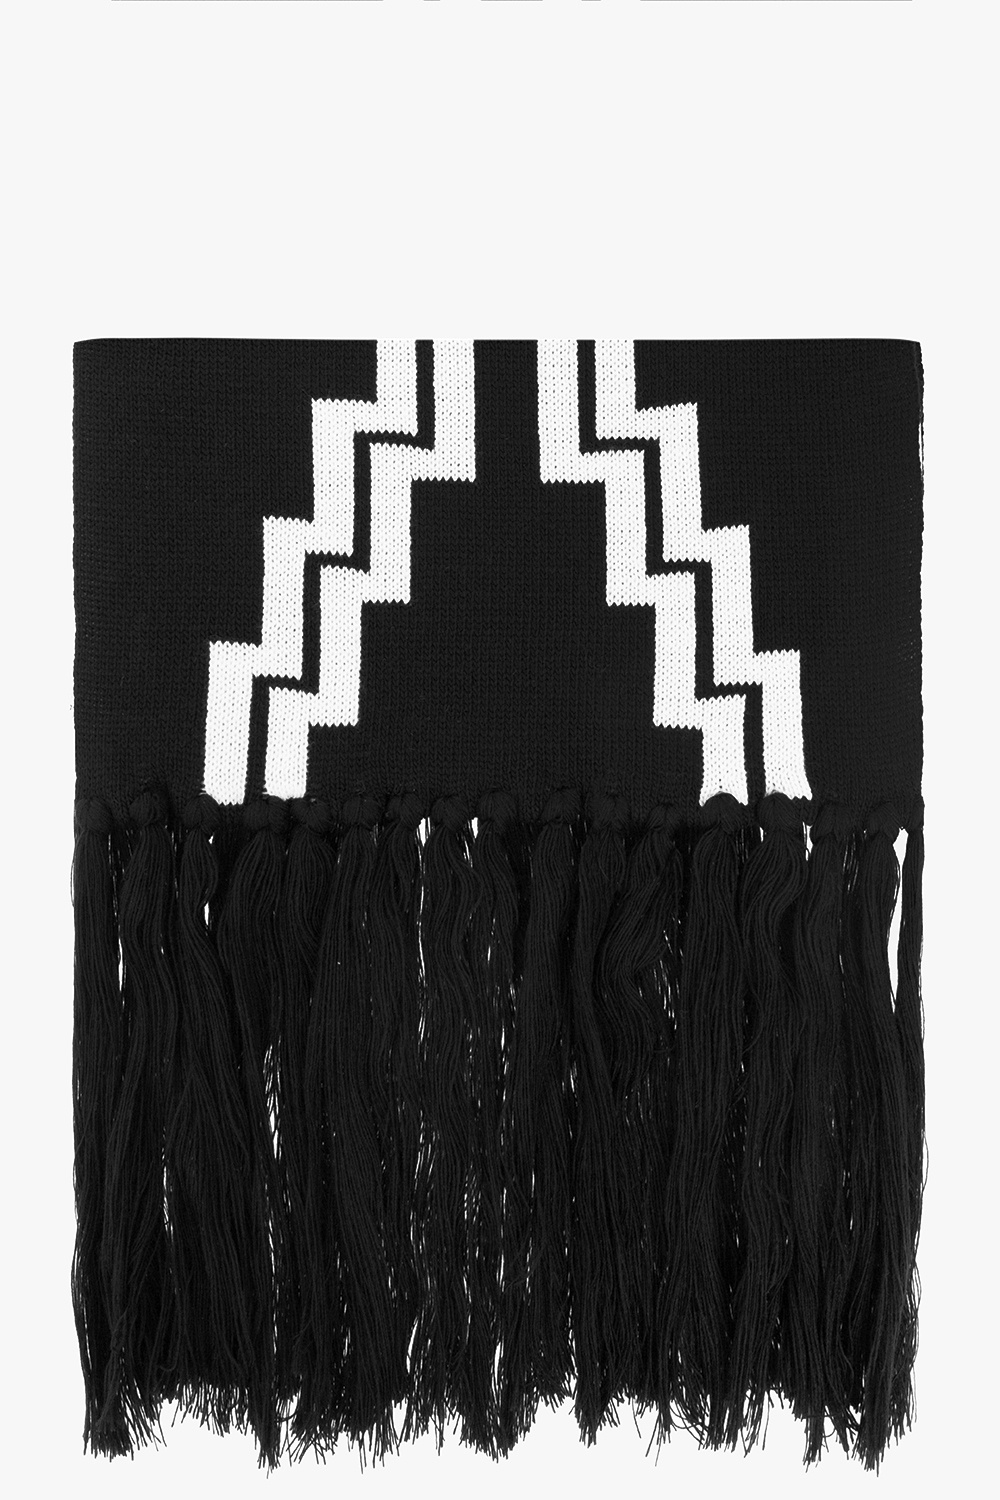 Marcelo Burlon The most coveted shoe models are waiting for a place in your spring wardrobe